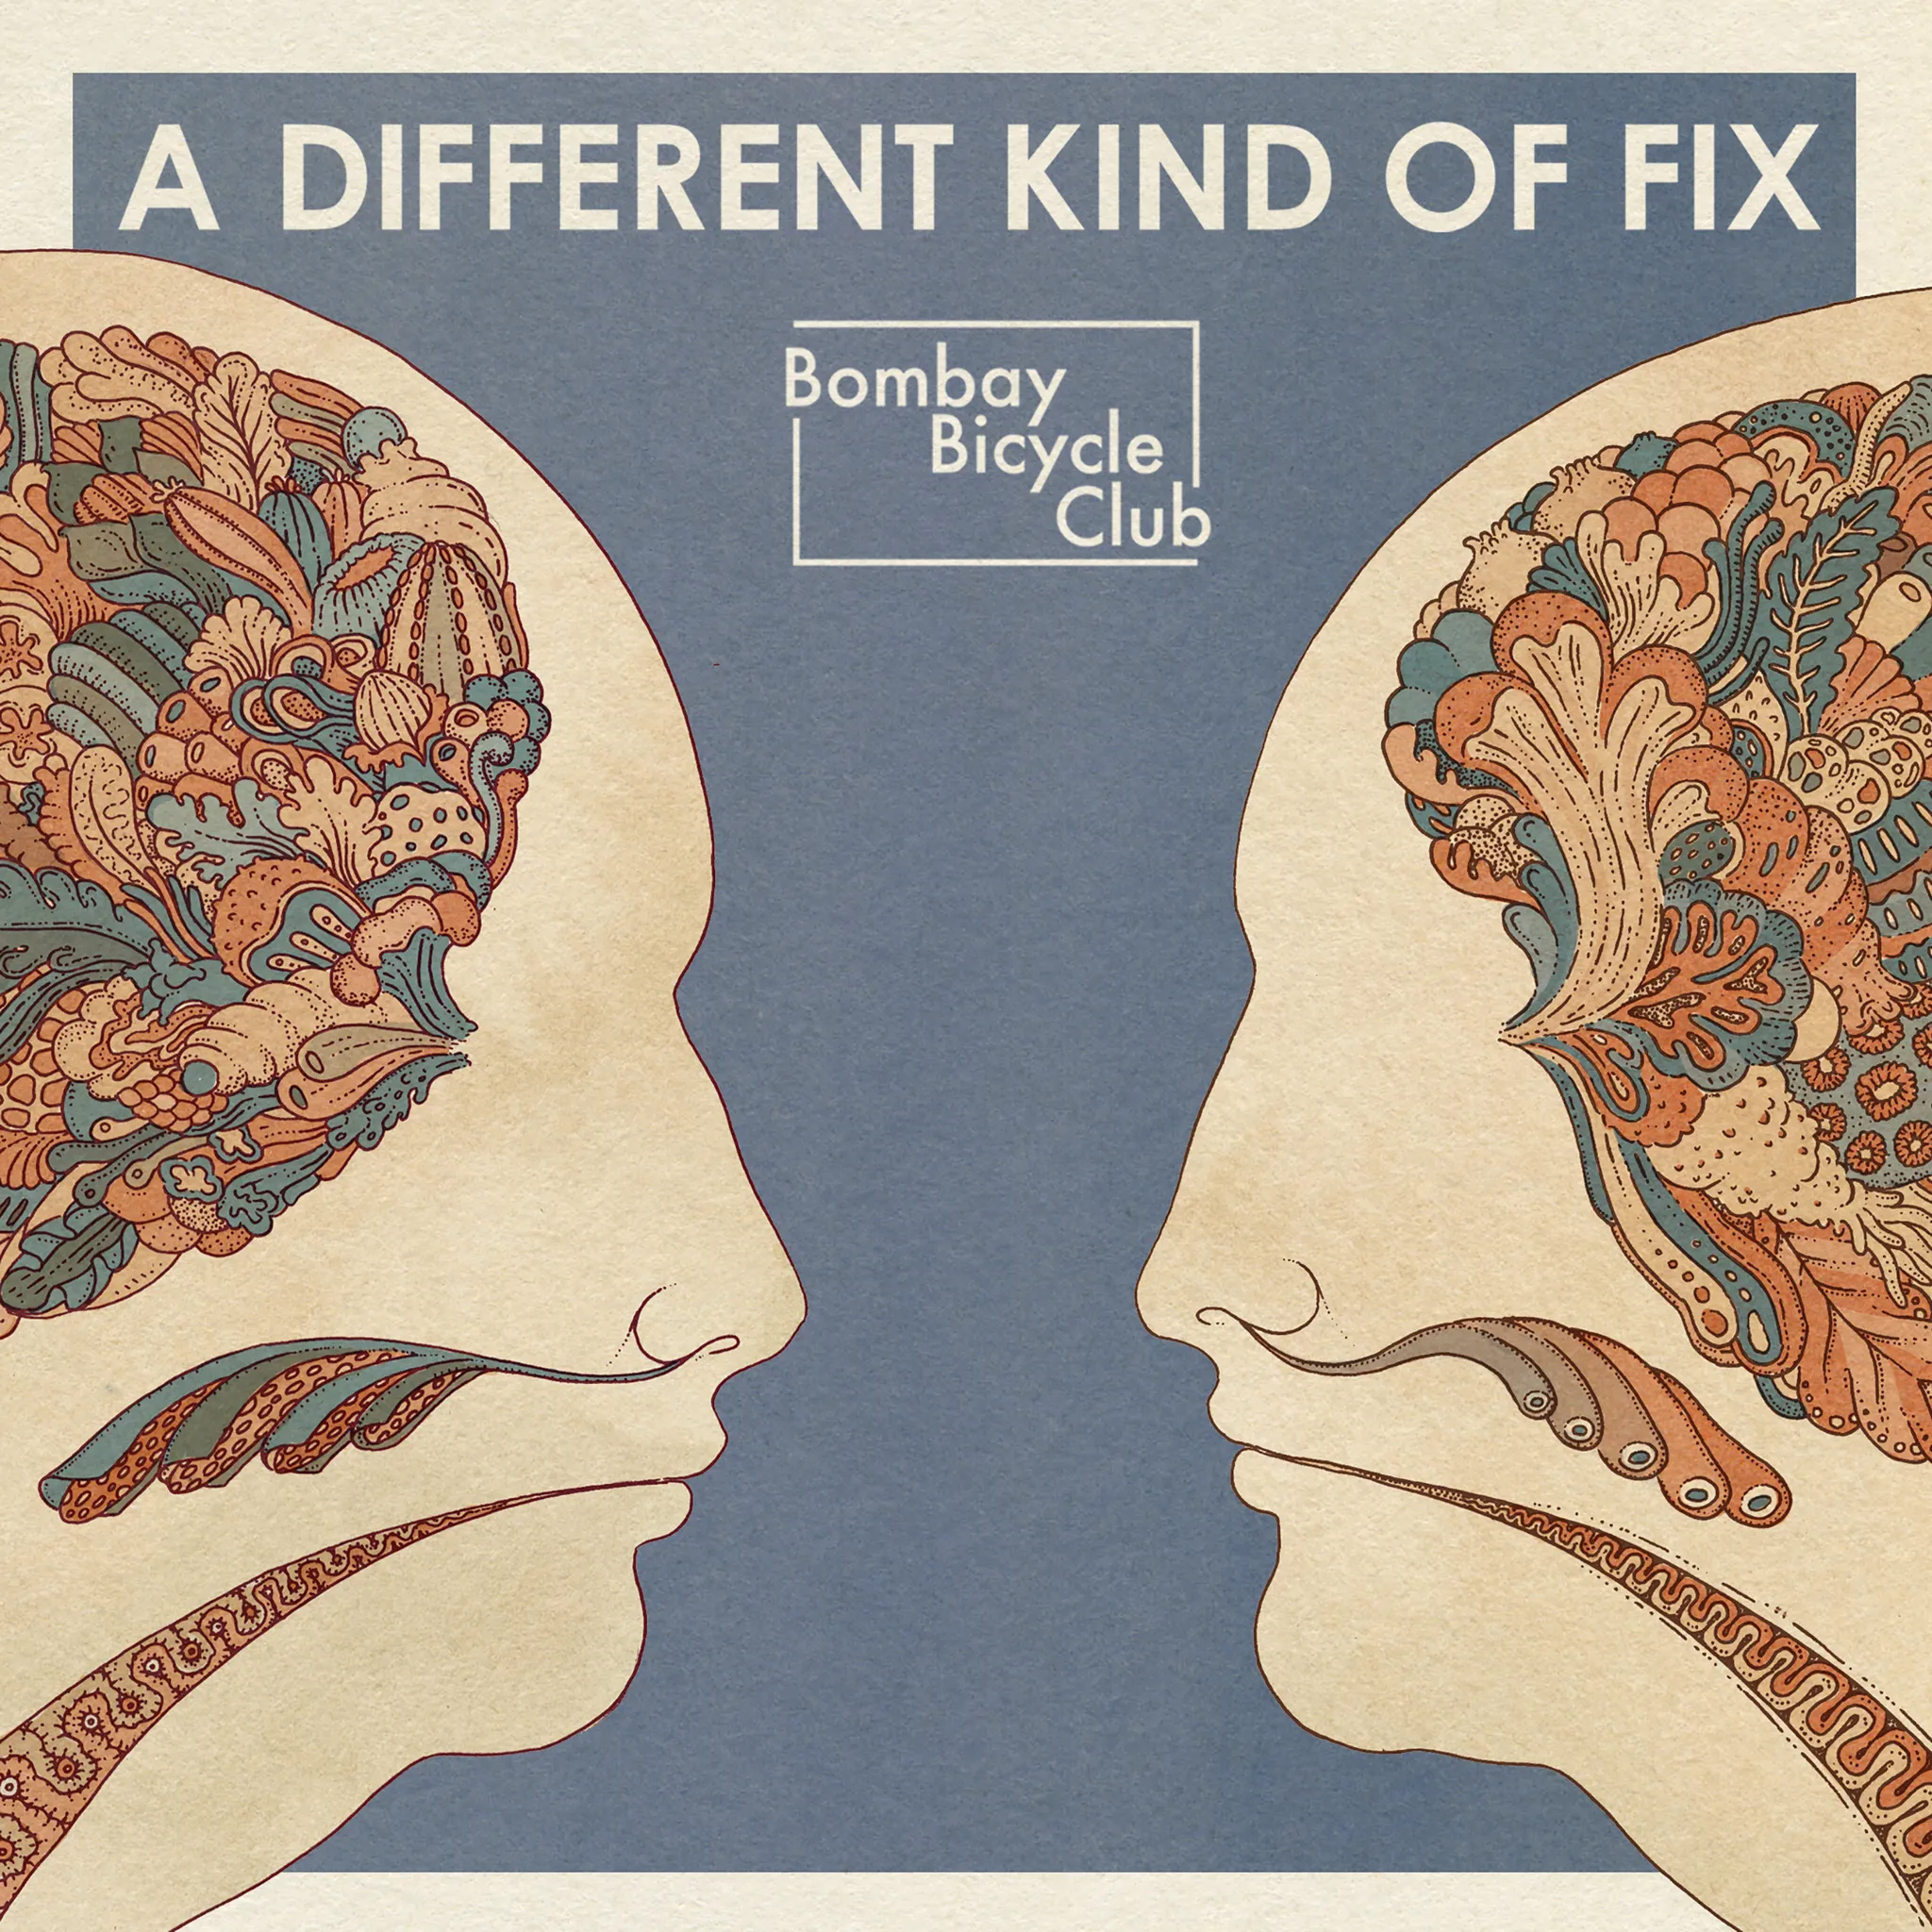 Bombay Bicycle Club - Different Kind of Fix artwork